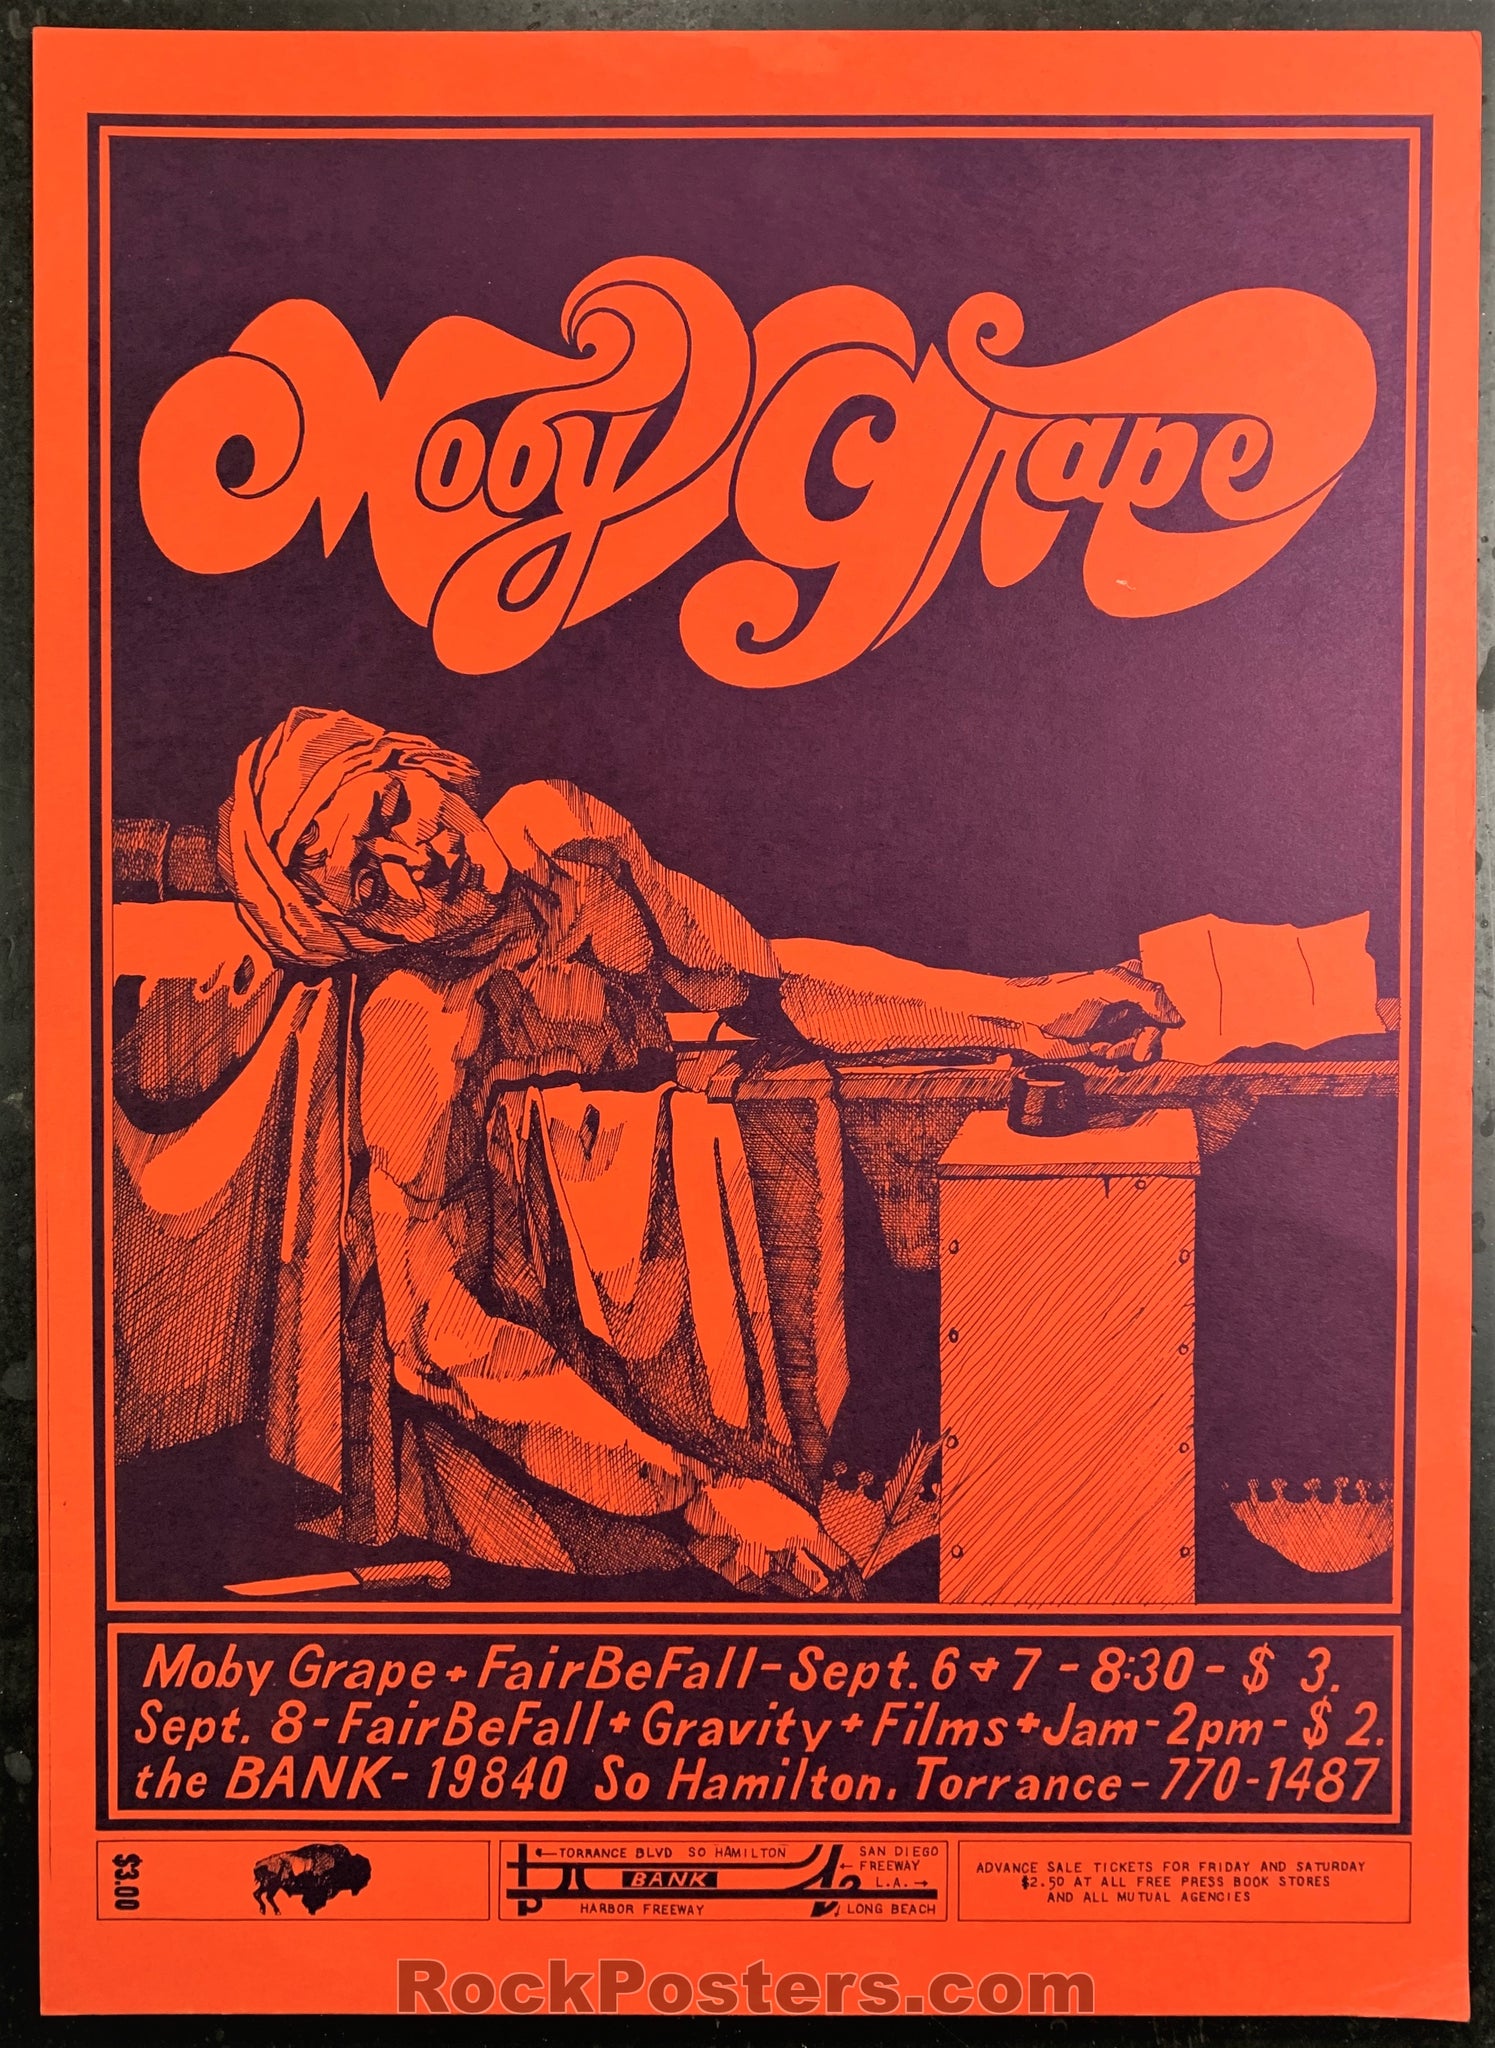 AUCTION - AOR-3.86 - Moby Grape - 1968 Poster - The Bank - Excellent